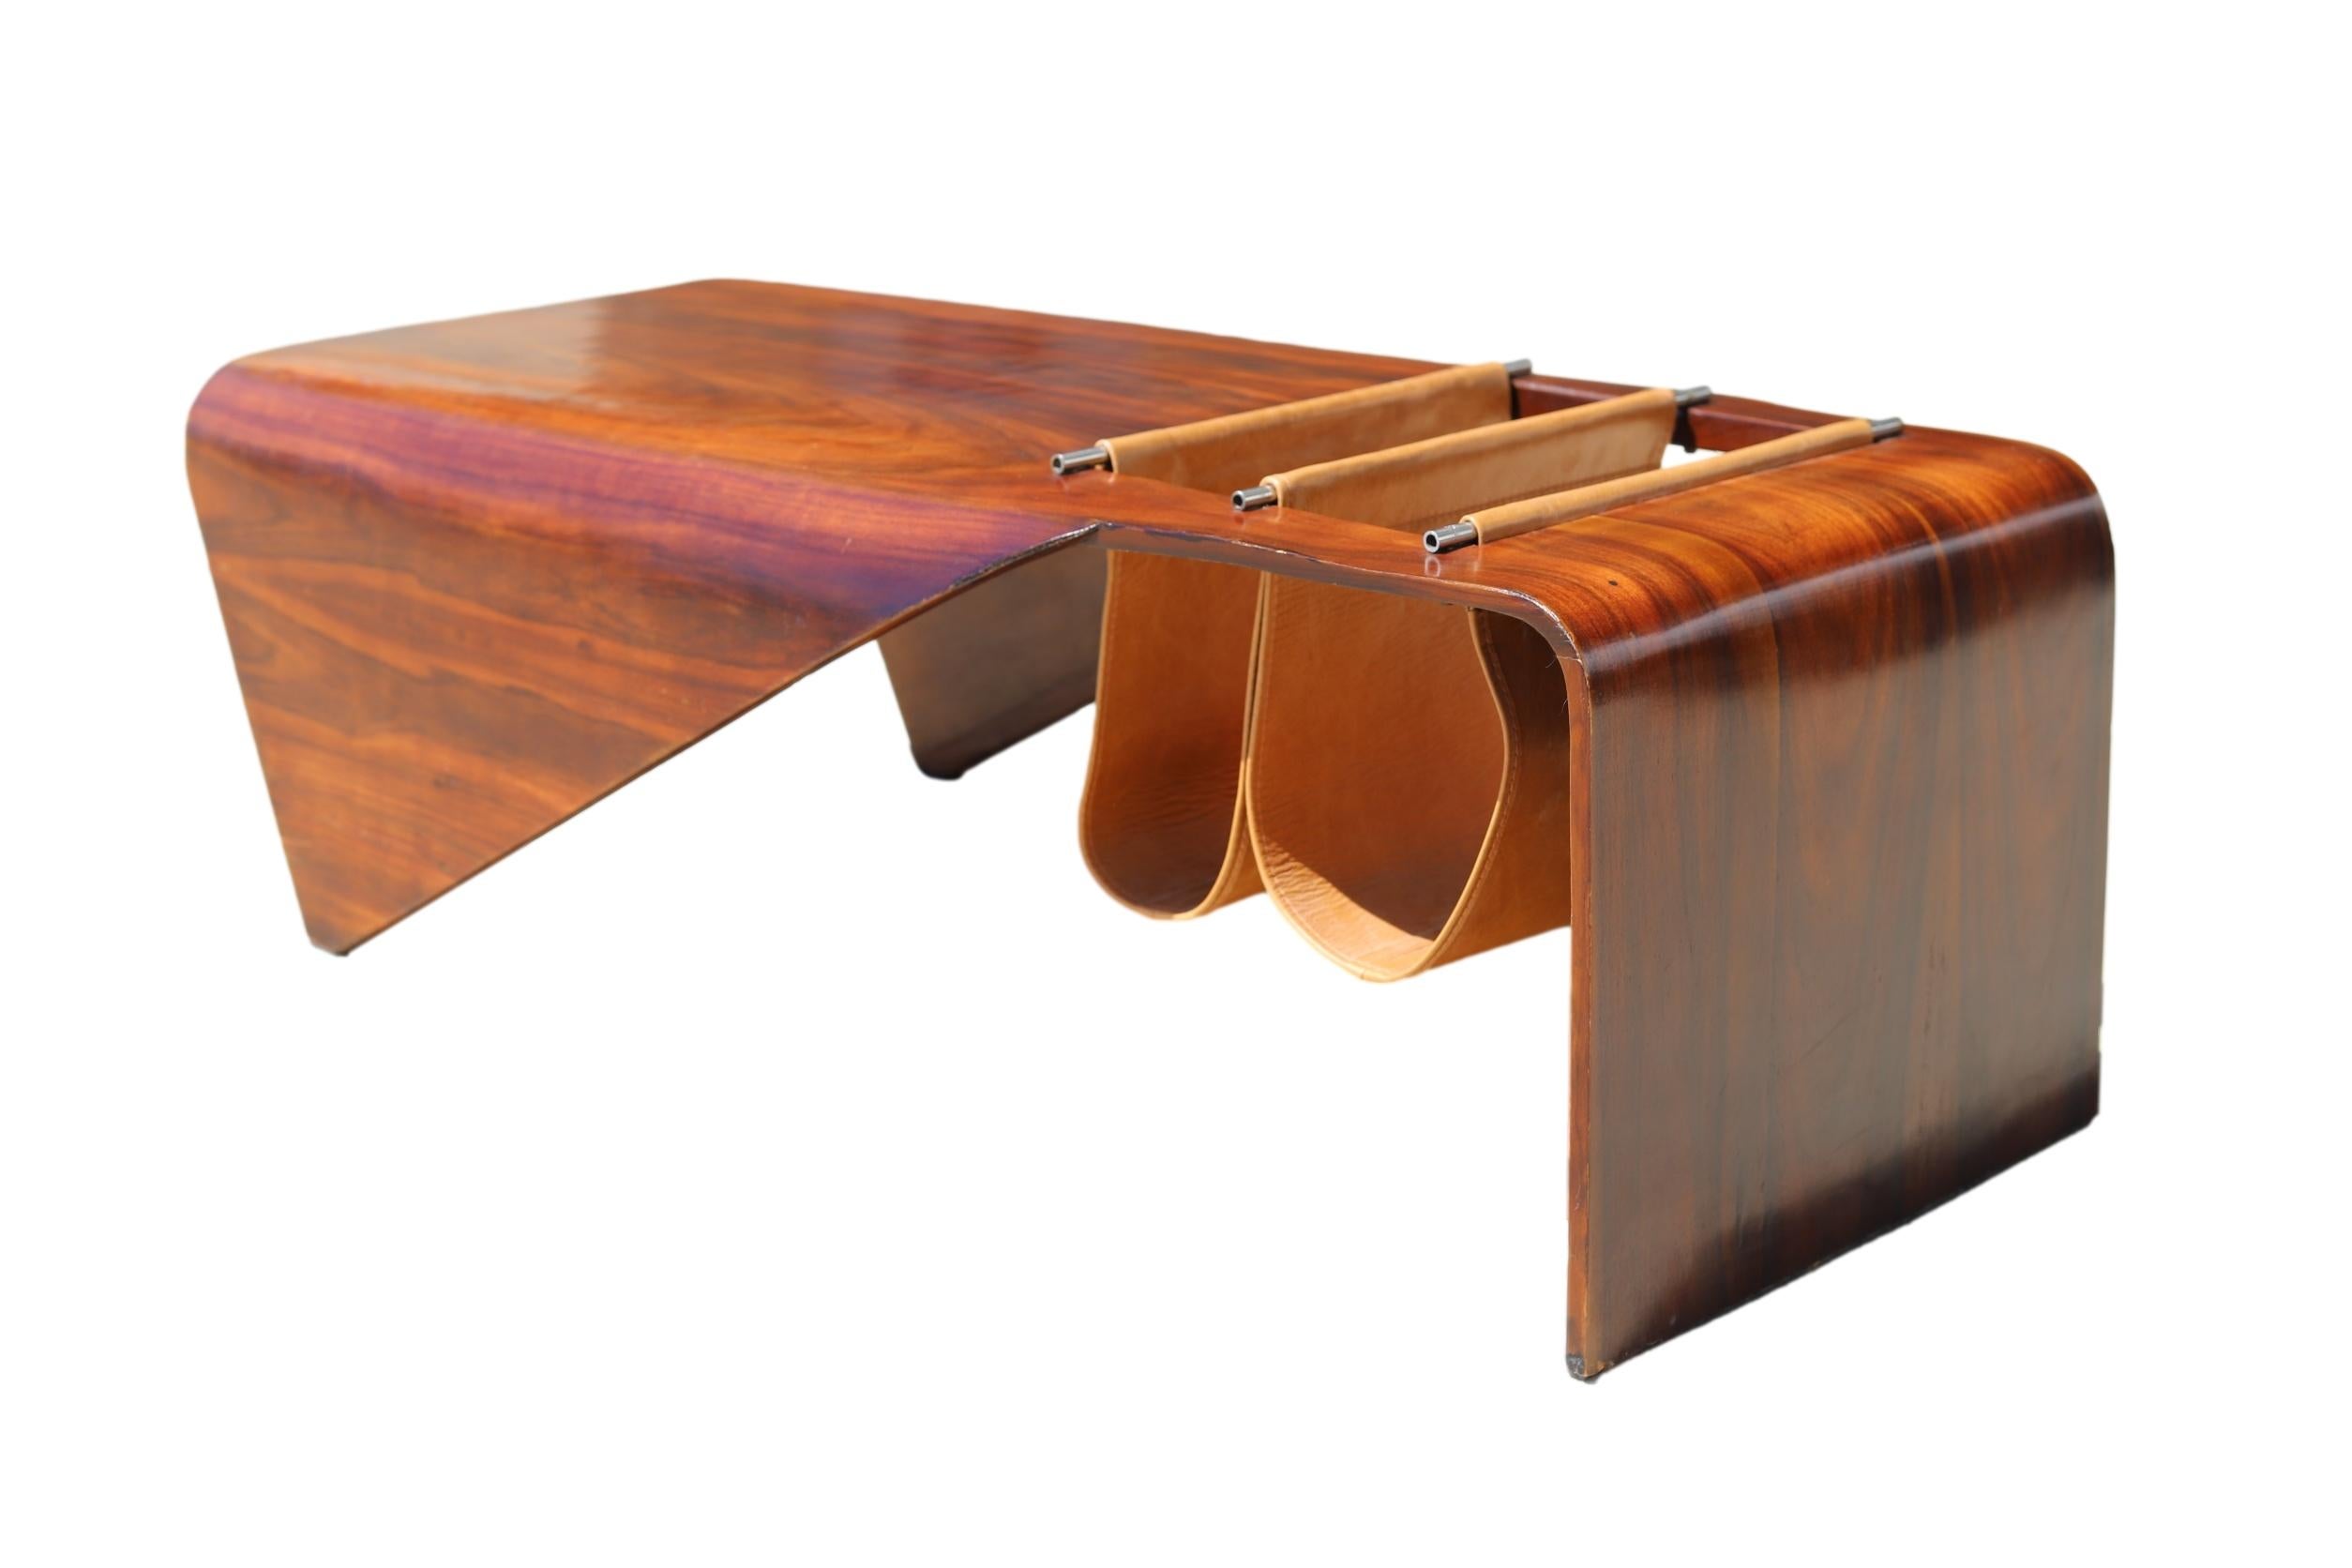 Zalszupin’s table Andorinha is another creation inspired by nature – the shape of a swallow. He transforms this inspiration into a multifunctional coffee table with ease, cutting out an opening in the tabletop where he places a dual hanger for